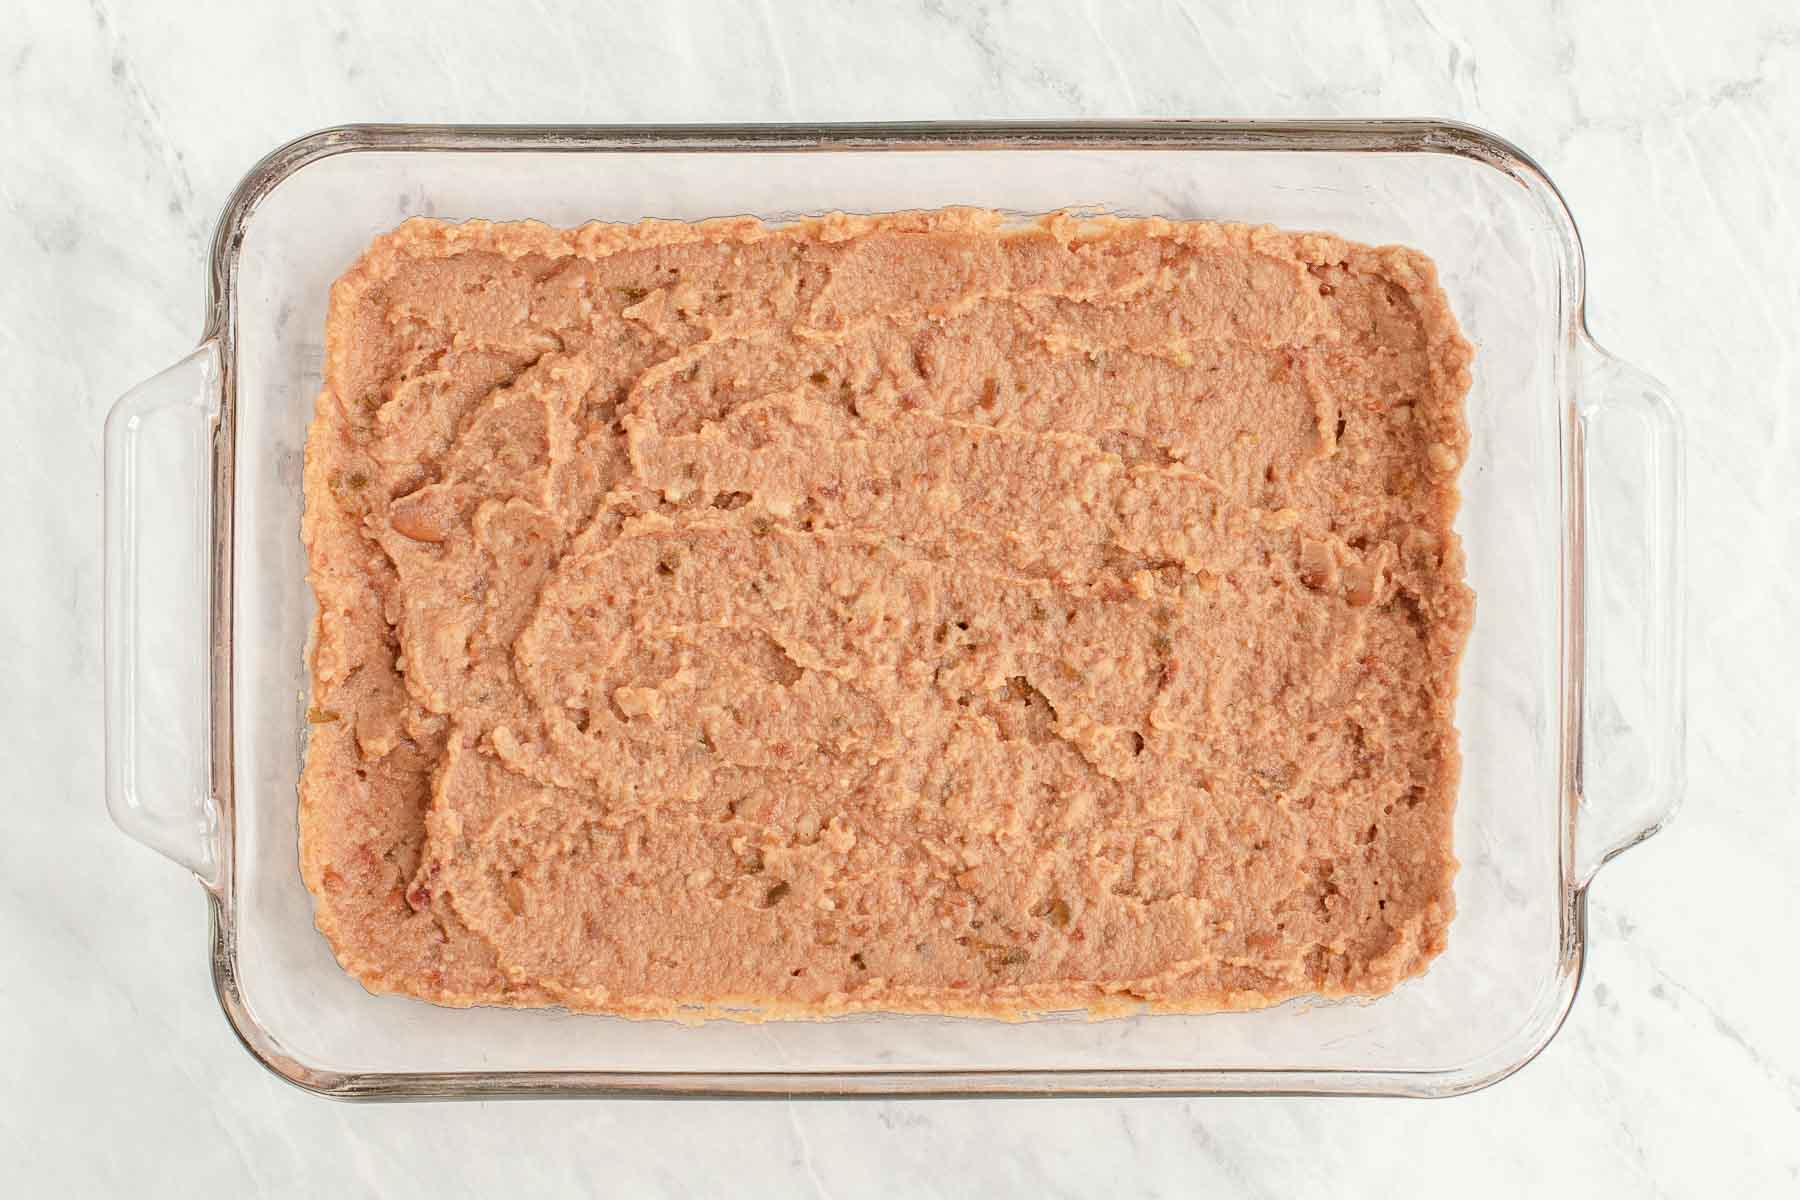 Refried beans spread in a casserole dish.